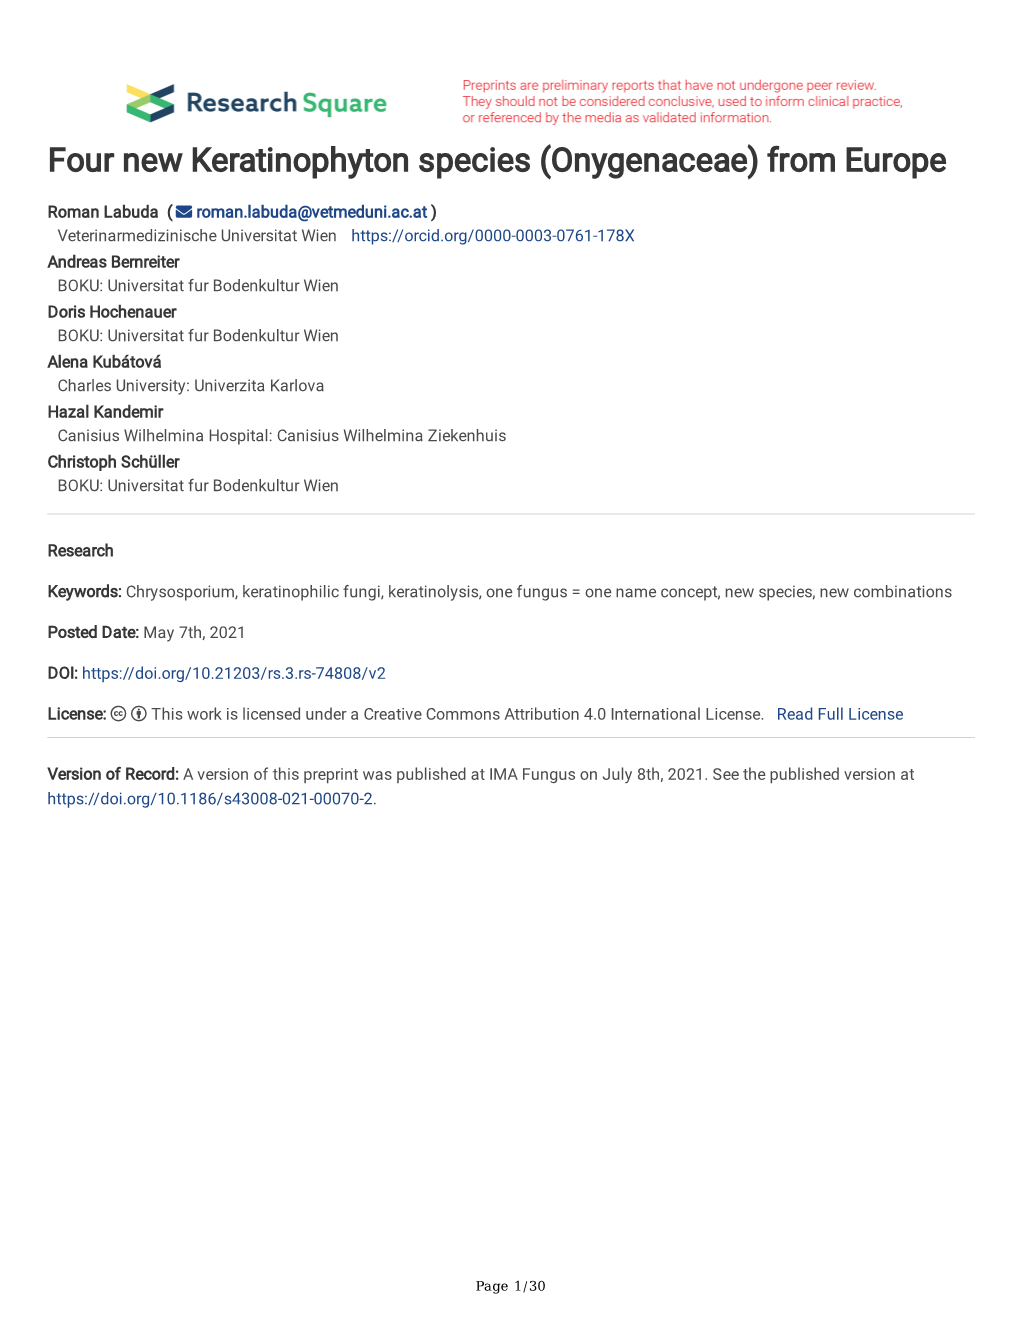 Four New Keratinophyton Species (Onygenaceae) from Europe